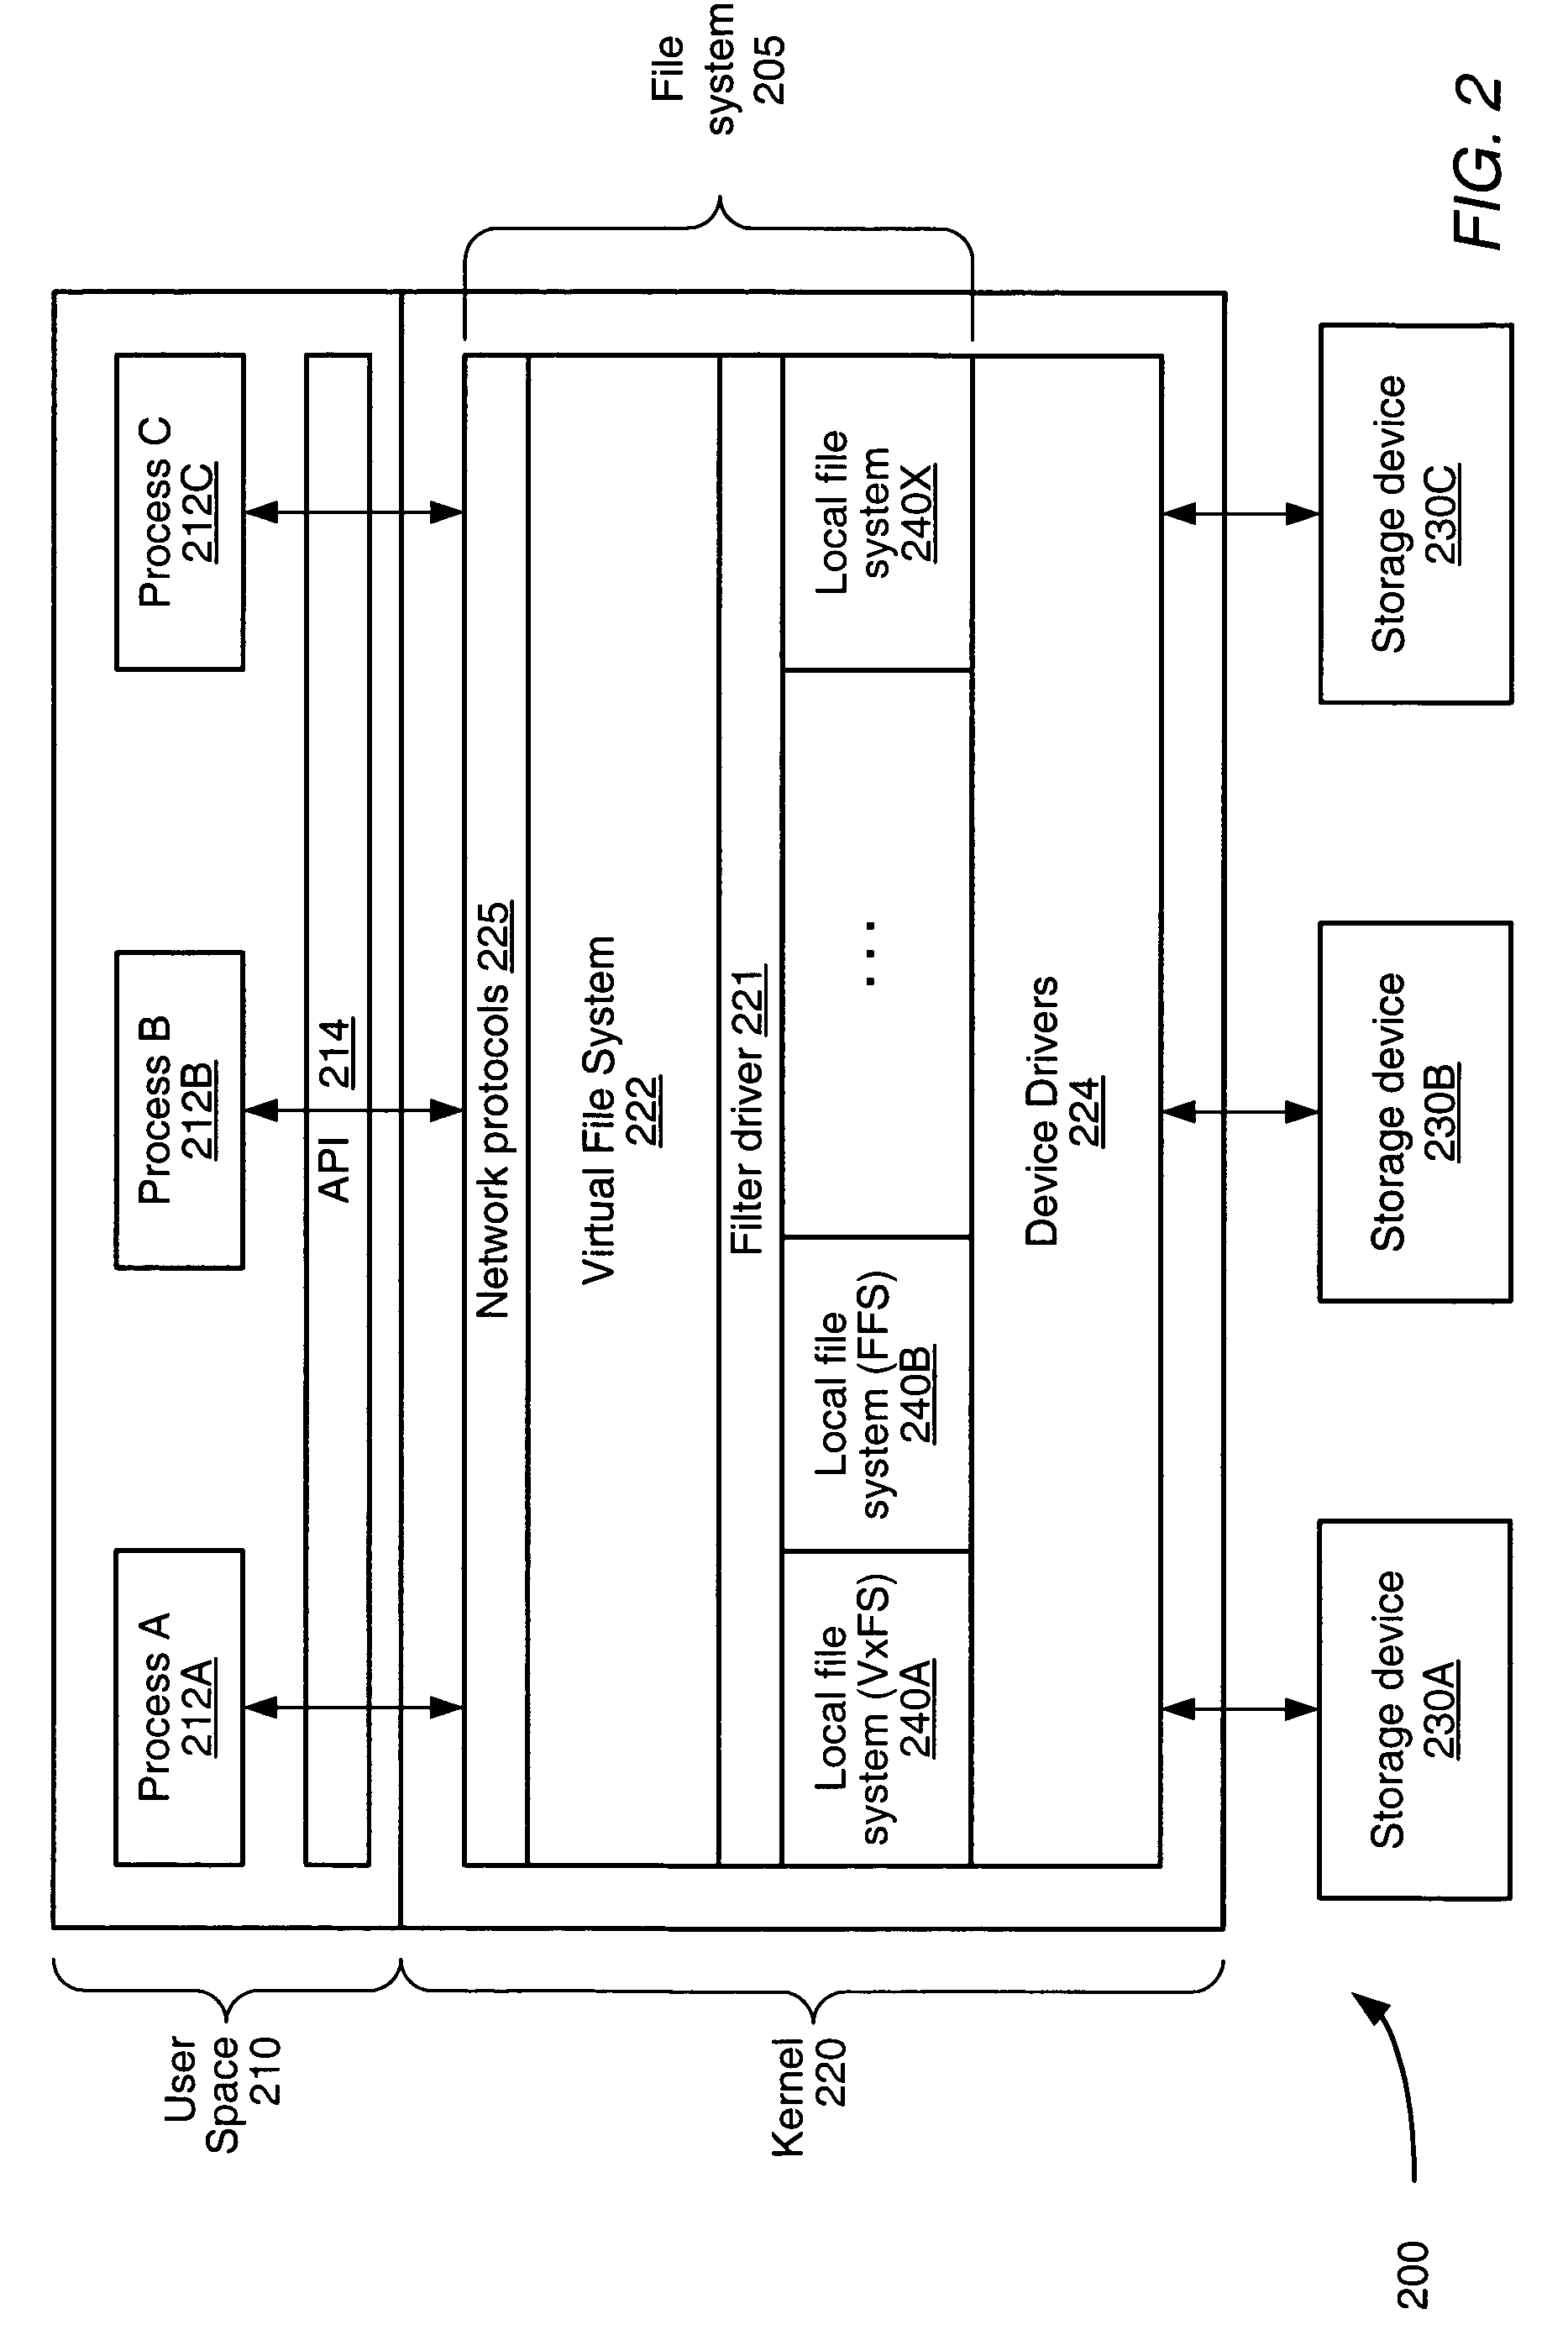 System and method for detecting and storing file content access information within a file system